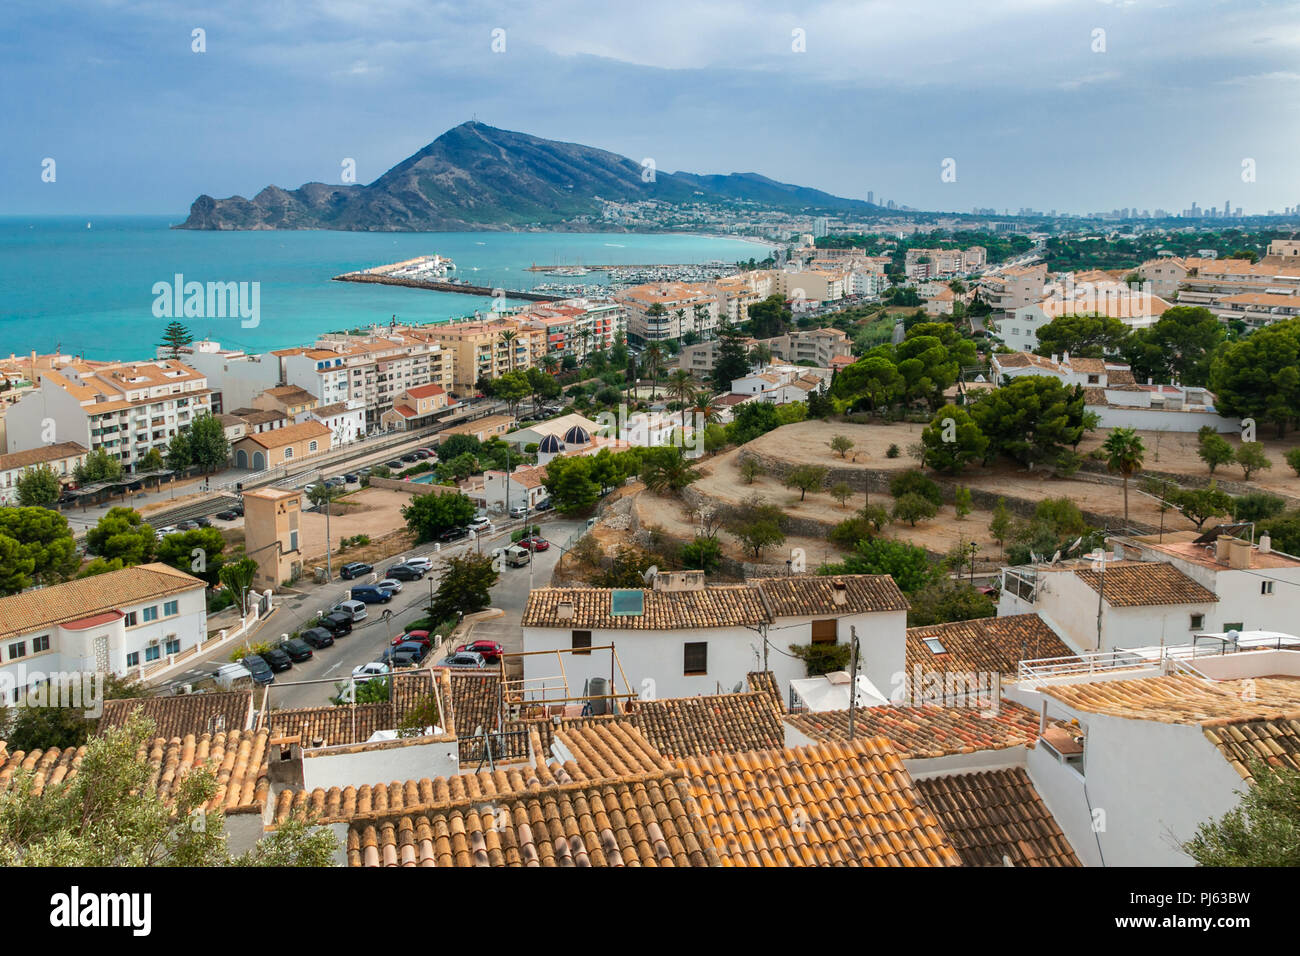 View of the orange roofs of houses in the town of Altea, Valencia, Spain. In the distance, the Mediterranean, the Mount of Mount Ifach in Calpe. Stock Photo